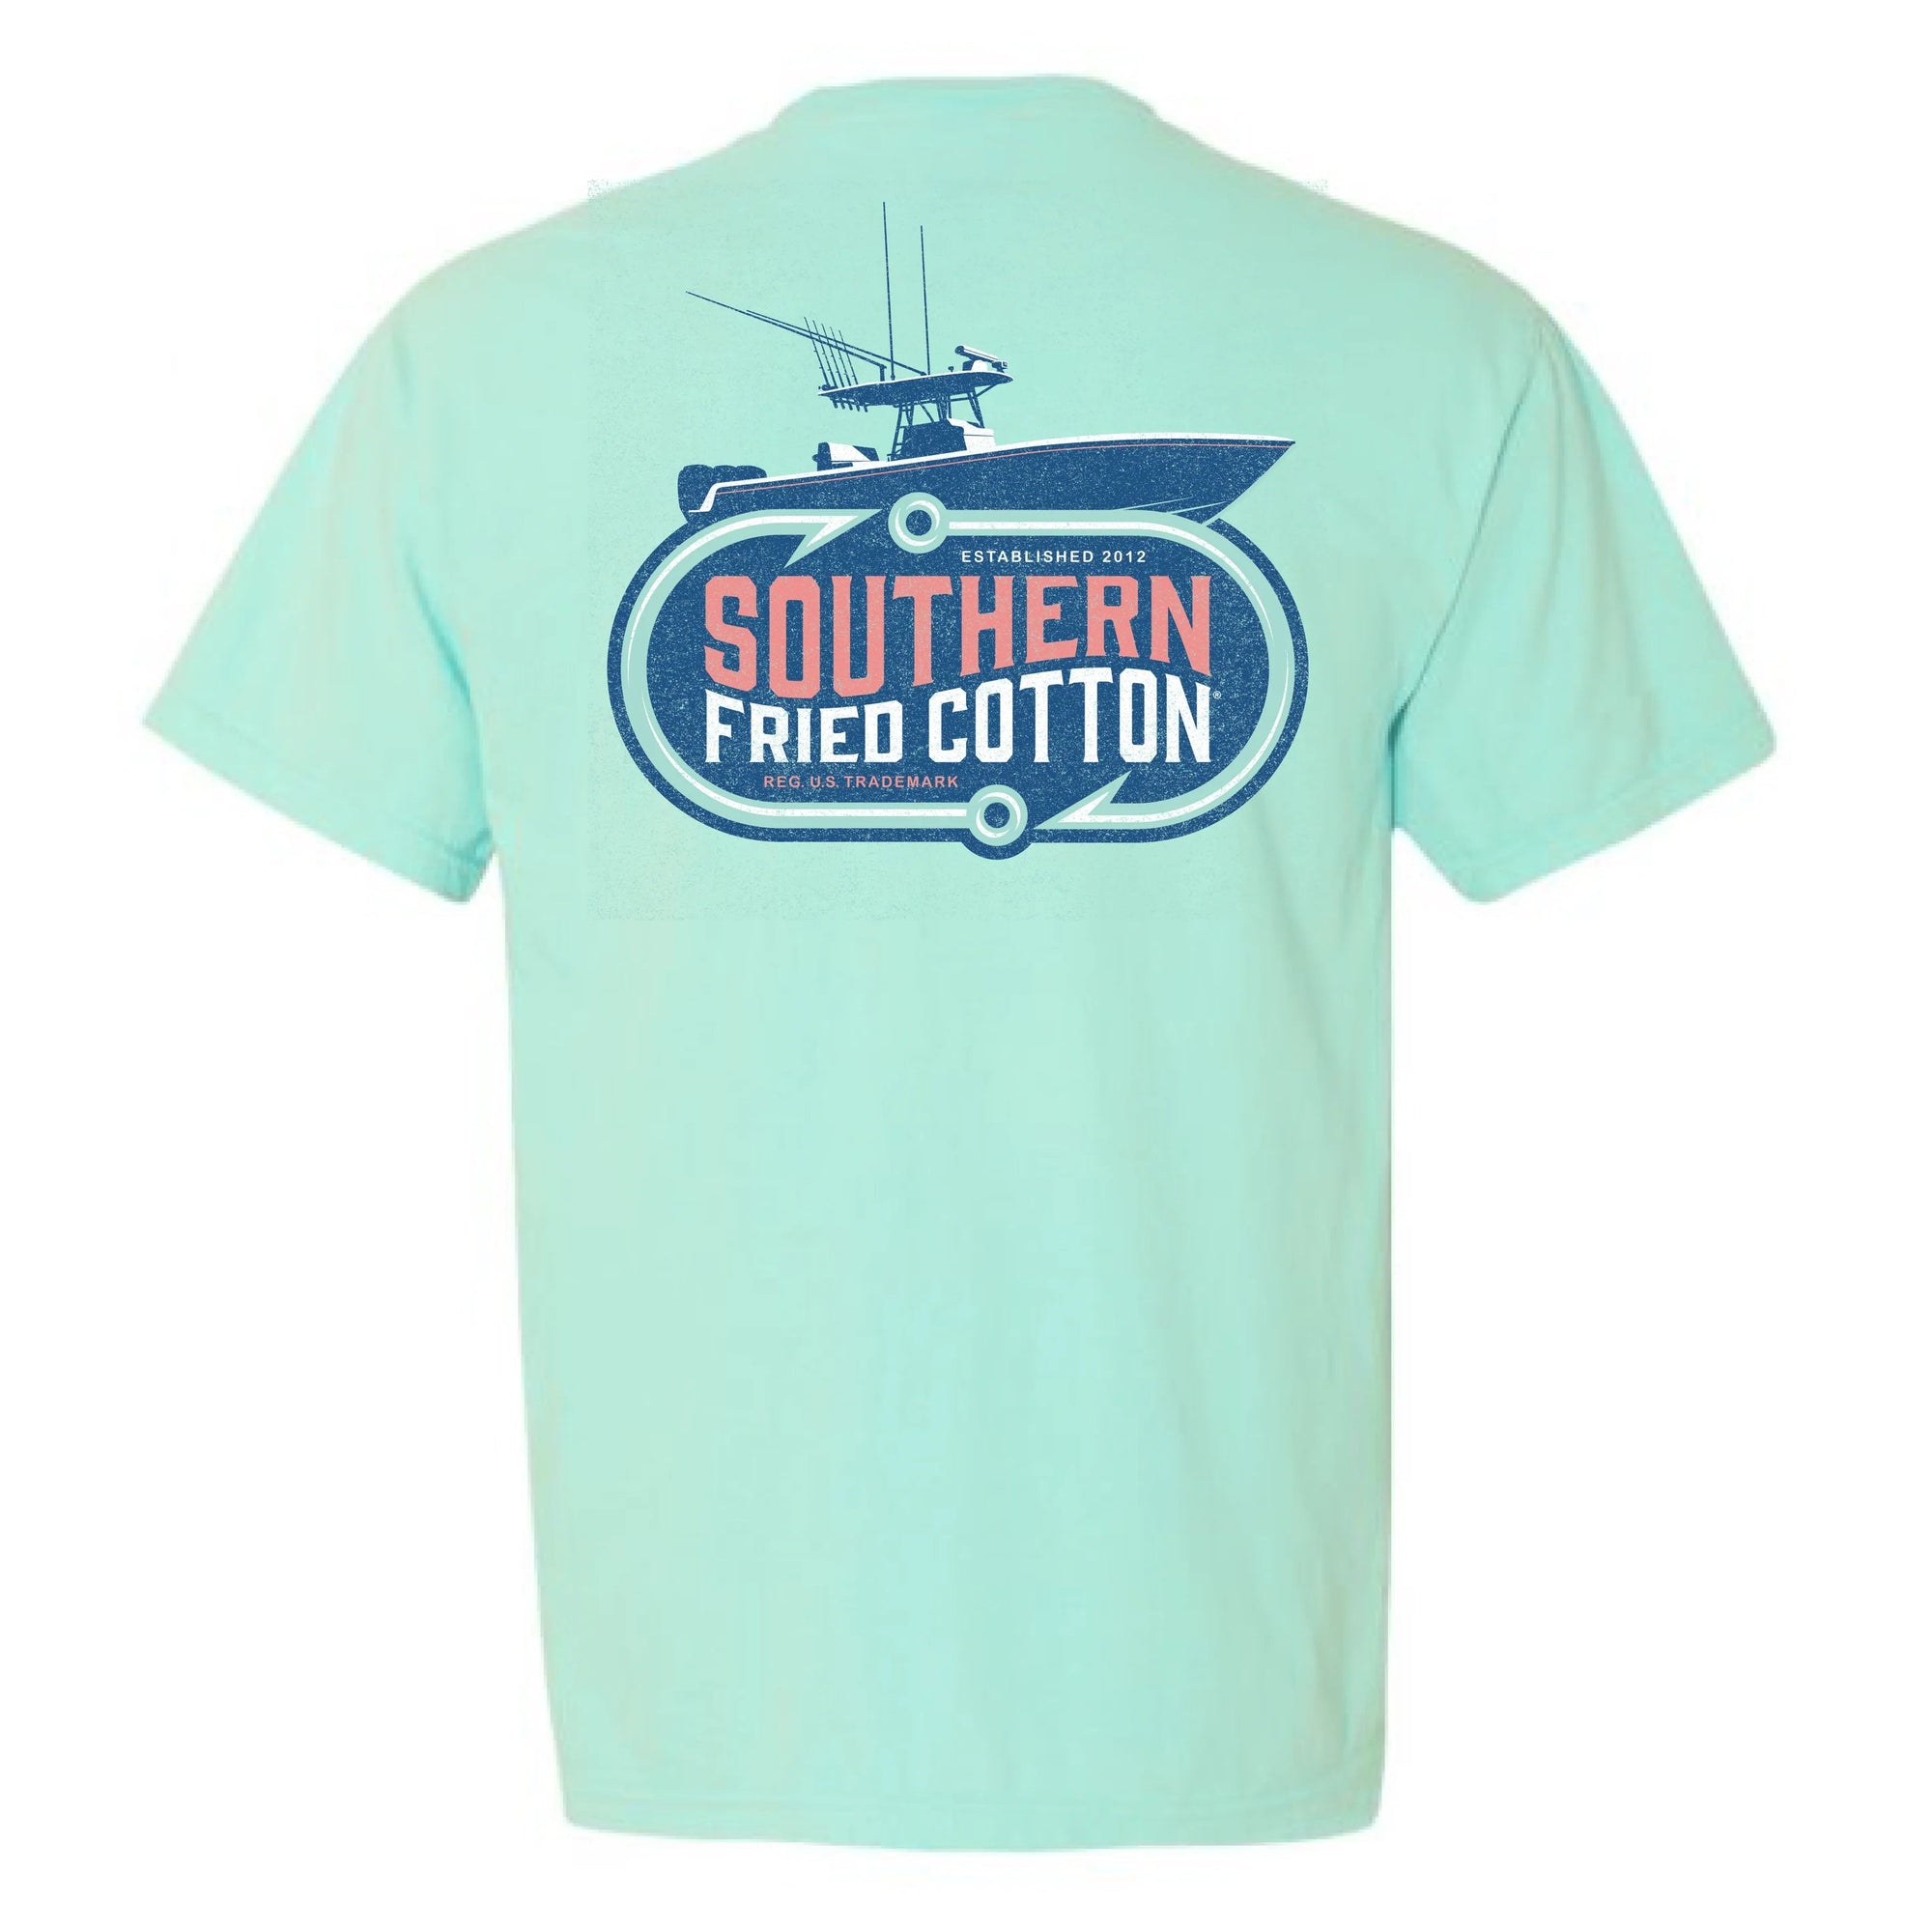 SOUTHERN FRIED COTTON Men's Tees Southern Fried Cotton Off Shore Tee || David's Clothing